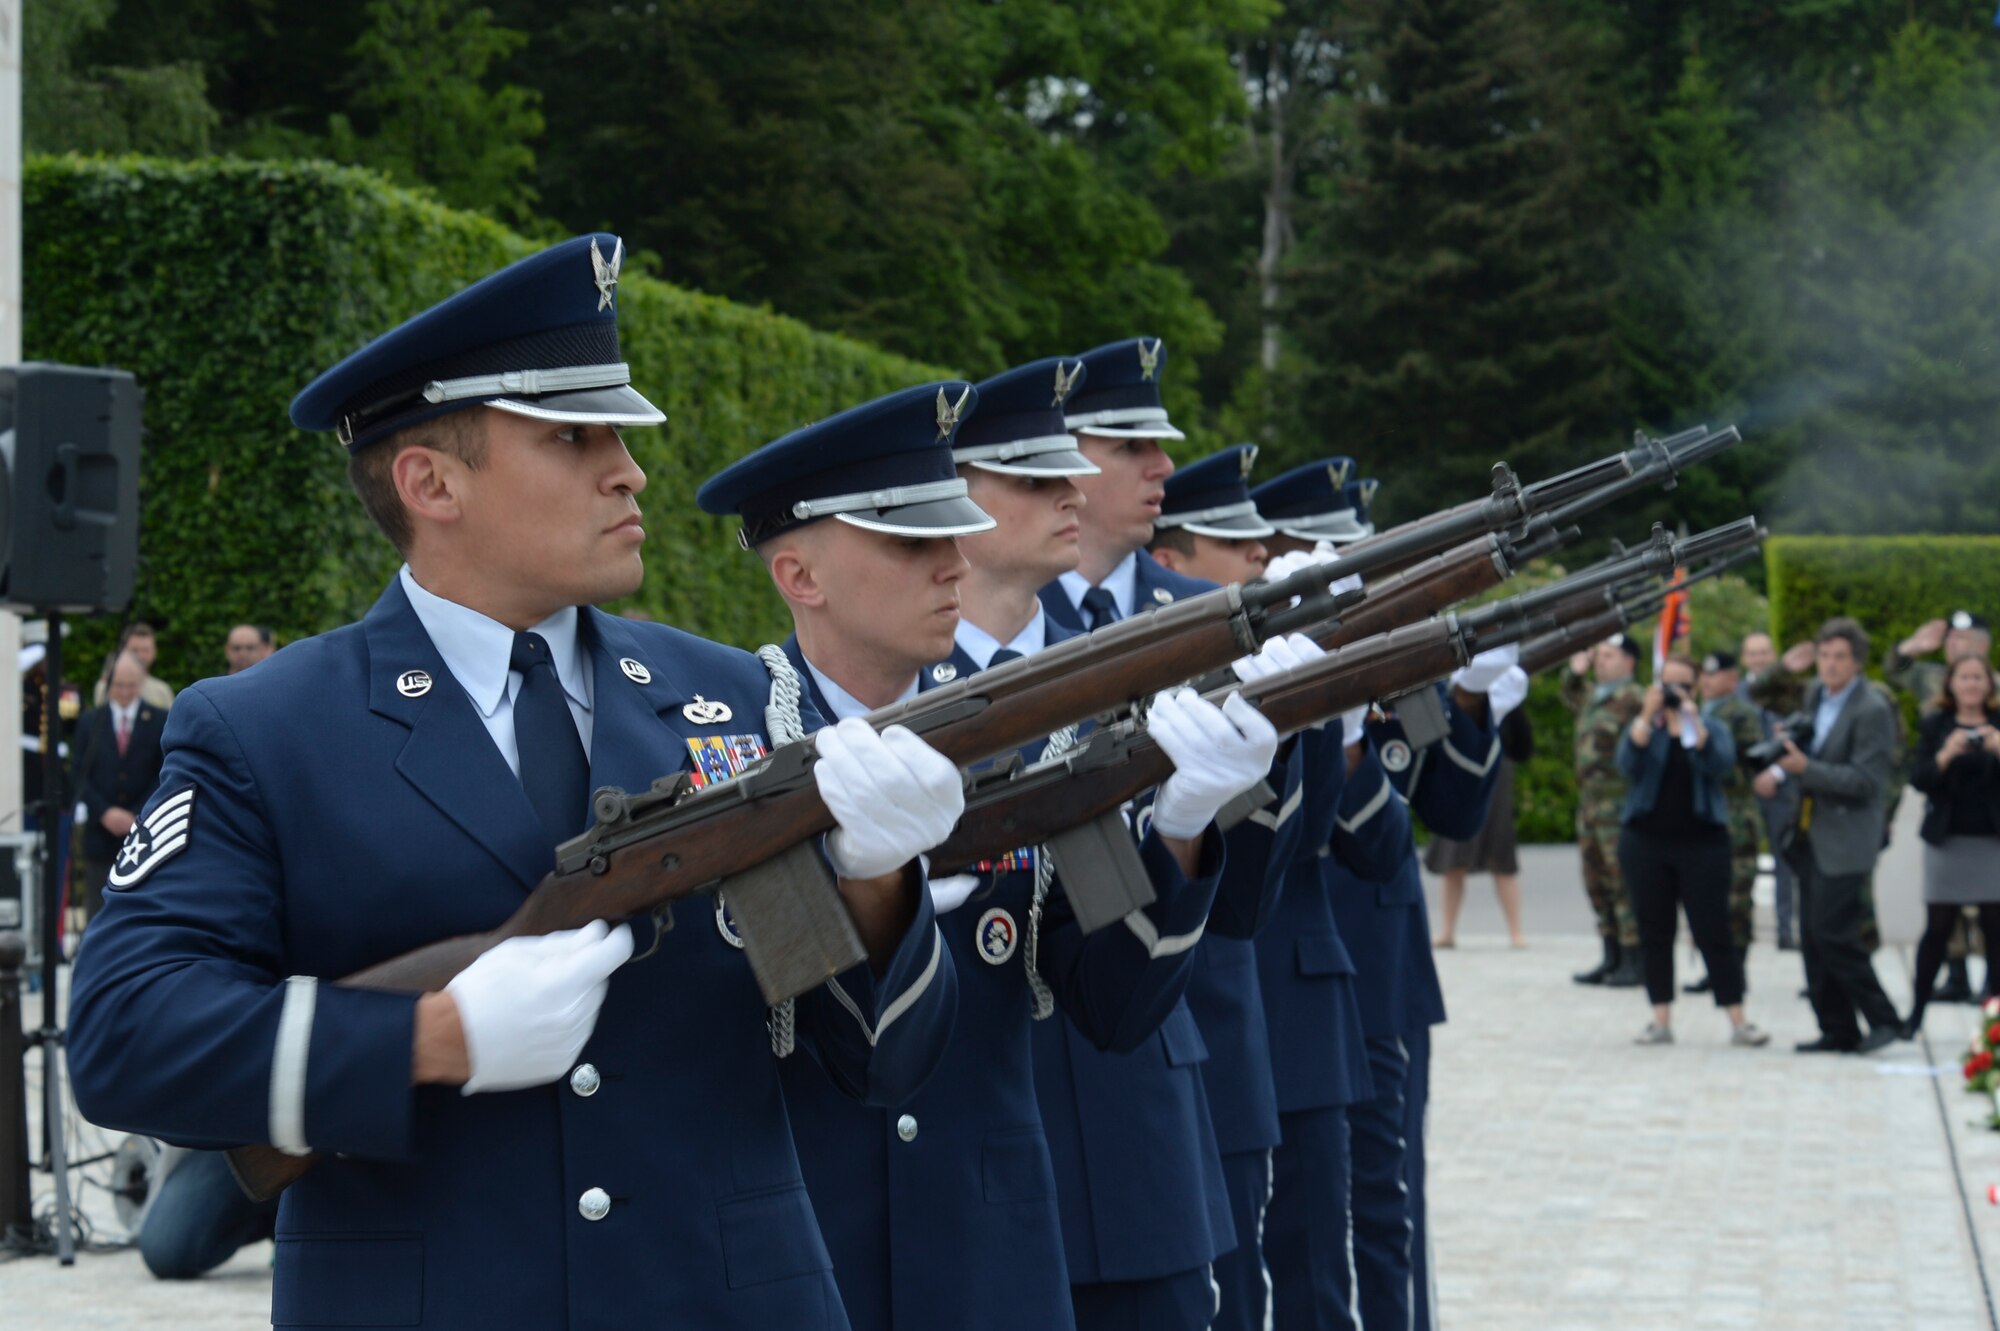 A U.S. Air Force Honor Guard detail from Spangdahlem Air Base, Germany, conducts a ceremonial volley as part of a Memorial Day ceremony at the Luxembourg American Cemetery and Memorial in Luxembourg, May 28, 2016. The base's Airmen also served as a ceremonial flight in service dress, caretakers of the cemetery's Luxembourg and U.S. flags, and escorts for guests to lay wreaths. (U.S. Air Force photo by Staff Sgt. Joe W. McFadden/Released)  